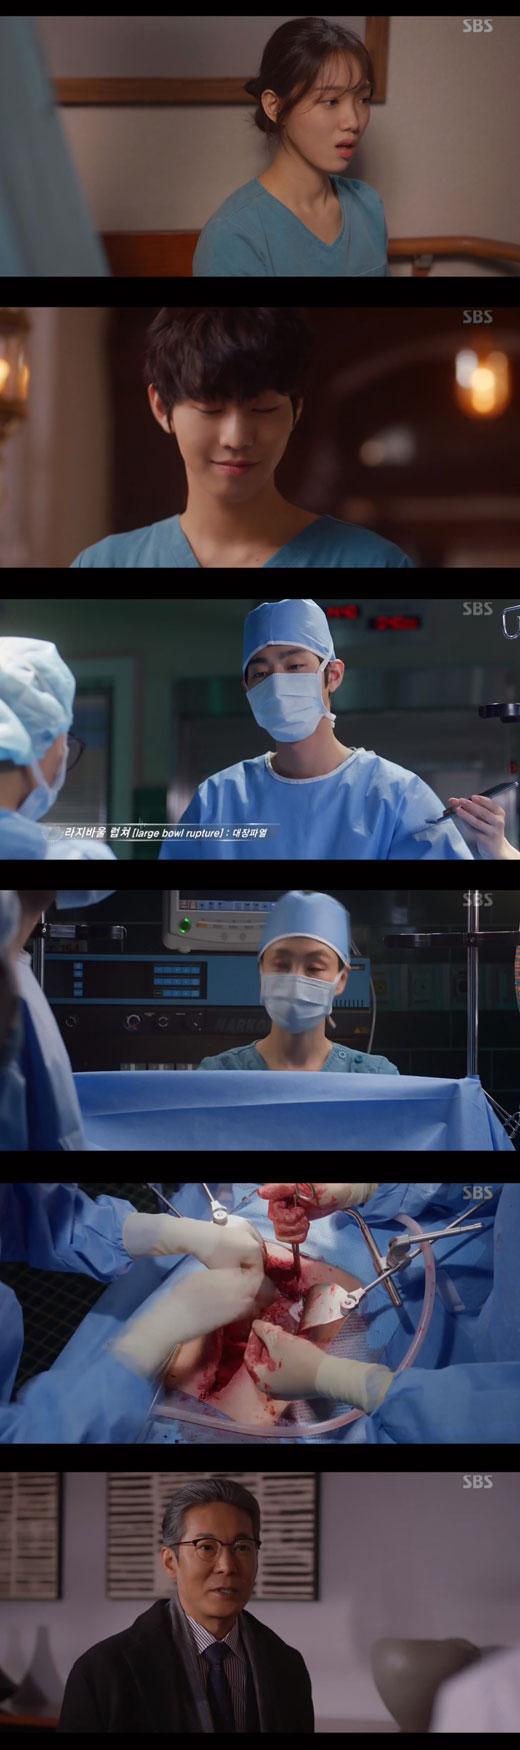 Will Romantic Doctor Kim Sabu 2 Ahn Hyo-seop leave Doldam Hospital?Lee Sung-kyung (Cha Eun-jae) overcame the surgery Nausea in SBS Wolhwa Drama Romantic Doctor Kim Sabu 2 (playplayed by Kang Eun-kyung, directed by Yoo In-sik Lee Gil-bok) broadcast on the 17th.On the show, Seo Woo Jin (Ahn Hyo-seop) looked at Kim Sabus wound and worried, When will you get the date of surgery, please let me know because Im your doctor?Kim said, How long will the operating room not go in? Seo Woo Jin replied, It is a problem with Professor Park Min-guk.Kim said, Do one more case on time.Doldam Hospital was accompanied by an emergency patient with a severed leg in a factory cutter.Cha Eun-jae, who ran to the medical room after receiving a call, performed first aid with Park Eun-tak (Kim Min-jae) at Bae Mun-jungs instructions, and Kim Sa-bu performed the surgery straight away.Then, Seo Woo Jin visited Park Min-guk (Kim Joo-heon) and demanded permission to operate, saying that there are emergency patients.Park Min-guk ordered Yang Ho-joon (Ko Sang-ho) to perform surgery instead, and did not give up surgery room 1 because he saw VVIP patients. Nam Do-il (Kyun Woo-min) was angry.Bae Moon-jung told Kim Sabu, The patient with the amputated leg does not want surgery. It seems to be due to the operation cost. Kim said, Did not you contact the factory?When Kim Sabus words were over, the patients wife and child came to the hospital, and his wife saw the severed legs and said, What do you do?Kim approached the two people and said, Get surgery soon. The degree of recovery depends on your will. The patient said, I can not do such surgery.I can not spend money because I do not know what will happen. What do my seller do? I just think I was a bad luck. Kim said, I am a father and now I do not remember anyone who gives up on it.I am a father who is desperated because of his luck. After the emergency patient continued to come in without any time to cope with Yang Ho-joon, Park Min-guk told Seo Woo Jin, Emergency trauma should be taken by Seo Woo Jin until the VIP patients surgery is over.Do not bother my team anymore, and Seo Woo Jin showed a joy and started preparing for surgery.On the other hand, Cha Eun-jae came to Kim Sabu, and Cha Eun-jae said to Kim Sabu, I have not finished the Nausea medicine you gave me. I would like you to tell me what medicine is.Kim said, I do not need a prescription. It was a digestive agent. I explained your case to a doctor I know well.I think the pressure to do well is maximized in a narrow operating room. You dont have to feel pressure anymore. Youve done well.Then, Seo Woo Jin, who was in surgery, called Cha Eun-jae and asked him to solve the patients chest symptoms.Seo Woo Jin said to Cha Eun-jae, who is worried that Nausea will be back, Why are you so confident? How much surgery you have done in the meantime.I will run and run if I fall again. Cha Eun-jae entered the operating room and finished the patients surgery perfectly.Then, Cha moved straight to the first operating room to assist Kim Sabu, who was leading a patient with a severed leg, and finished the operation safely.Yang Jun-ho, who failed to schedule the VIPs surgery, asked Shim Hye-jin (Park Hyo-joo) to confirm the operating room, saying, I am sensitive to Professor Park Min-guk these days.Shim Hye-jin refused, saying, I am against this surgery. I have a bad feeling.Yang Jun-ho told Park Min-guk, and he said, Let me have surgery tomorrow.Finally, Seo Woo Jin was found and dragged by Ushijima the Loan Shark vendors while he was with Cha Eun-jae.Ushijima the Loan Shark vendors offered a contract to another hospital, threatening Seo Woo Jin that he had a person named Kim Sabu at the hospital.After that, Seo Woo Jin returned to Doldam Hospital, and he told Kim Sabu, I think I should go to another hospital.I wanted to quit several times, but I praised me for saying, I did not give up. I did not give up and I met Kim Sabu. It was not a long time, but I thanked him.